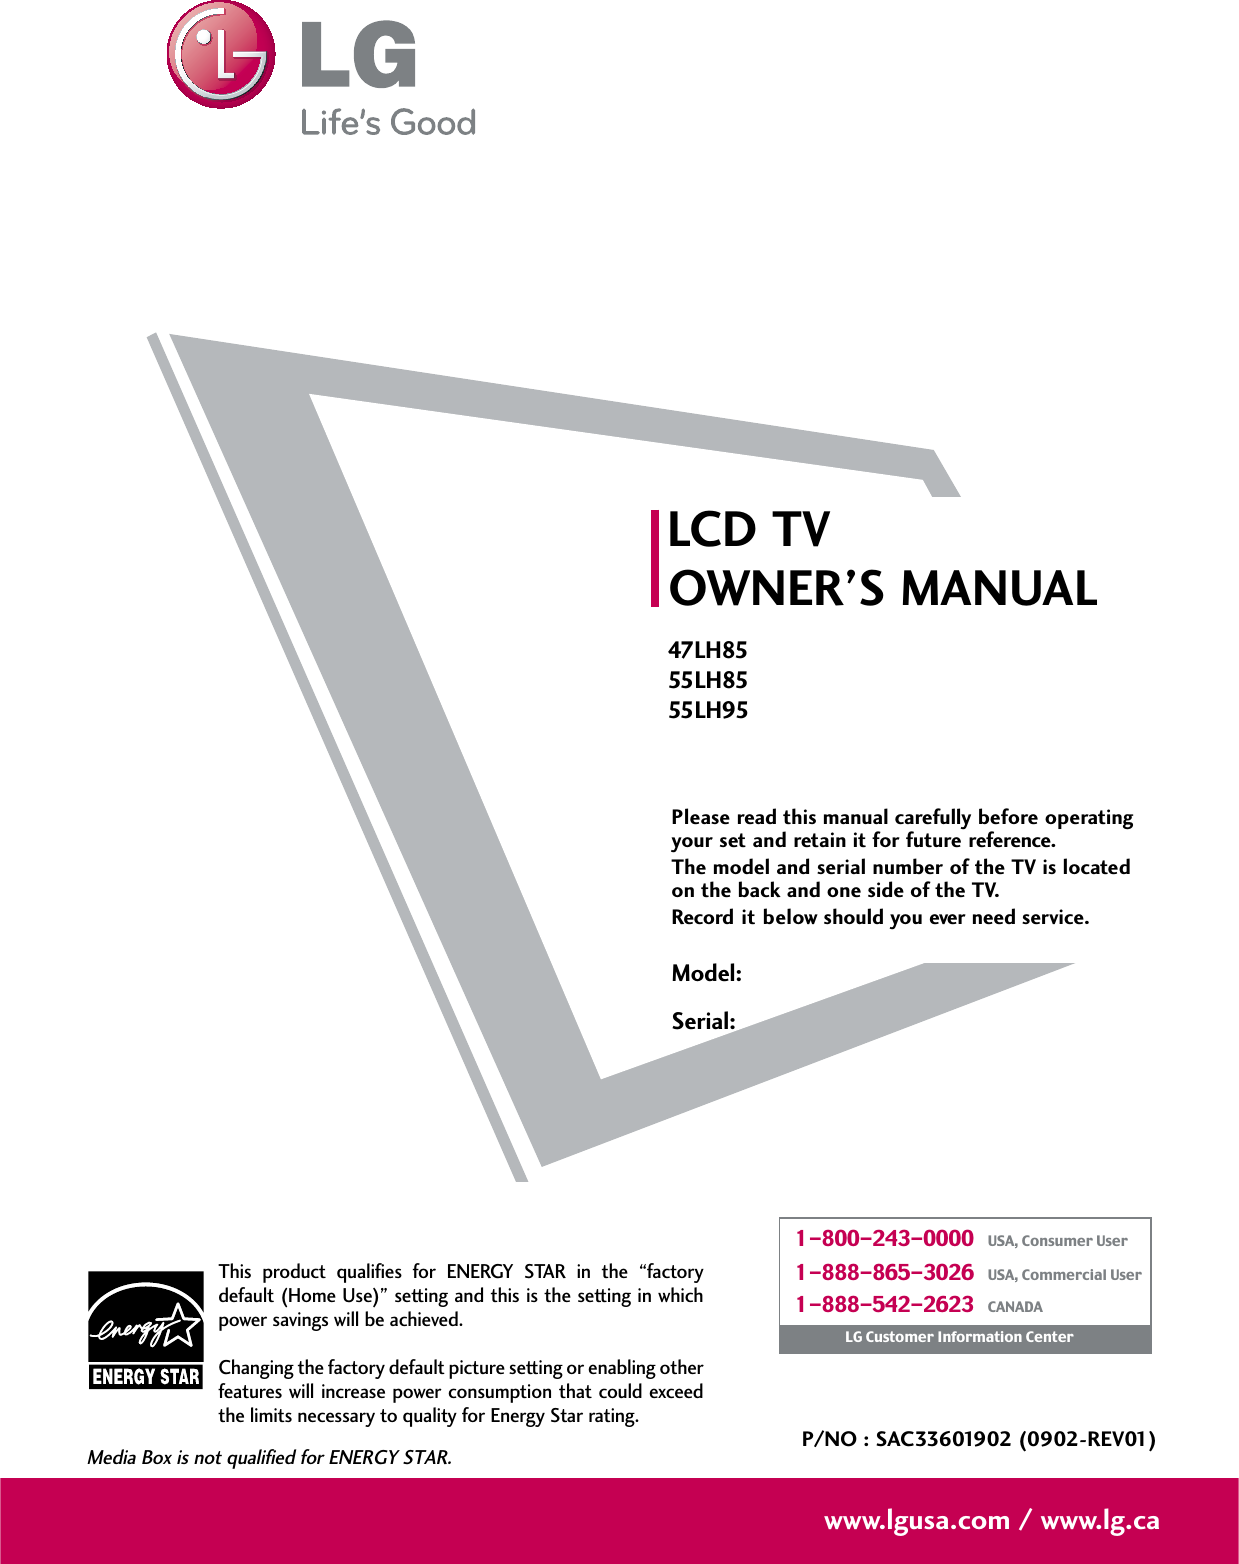 Please read this manual carefully before operatingyour set and retain it for future reference.The model and serial number of the TV is locatedon the back and one side of the TV. Record it below should you ever need service.LCD TVOWNER’S MANUAL47LH8555LH8555LH95P/NO : SAC33601902 (0902-REV01)www.lgusa.com / www.lg.caThis product qualifies for ENERGY STAR in the “factorydefault (Home Use)” setting and this is the setting in whichpower savings will be achieved.Changing the factory default picture setting or enabling otherfeatures will increase power consumption that could exceedthe limits necessary to quality for Energy Star rating.Media Box is not qualified for ENERGY STAR.Model:Serial:1-800-243-0000   USA, Consumer User1-888-865-3026   USA, Commercial User1-888-542-2623   CANADALG Customer Information Center